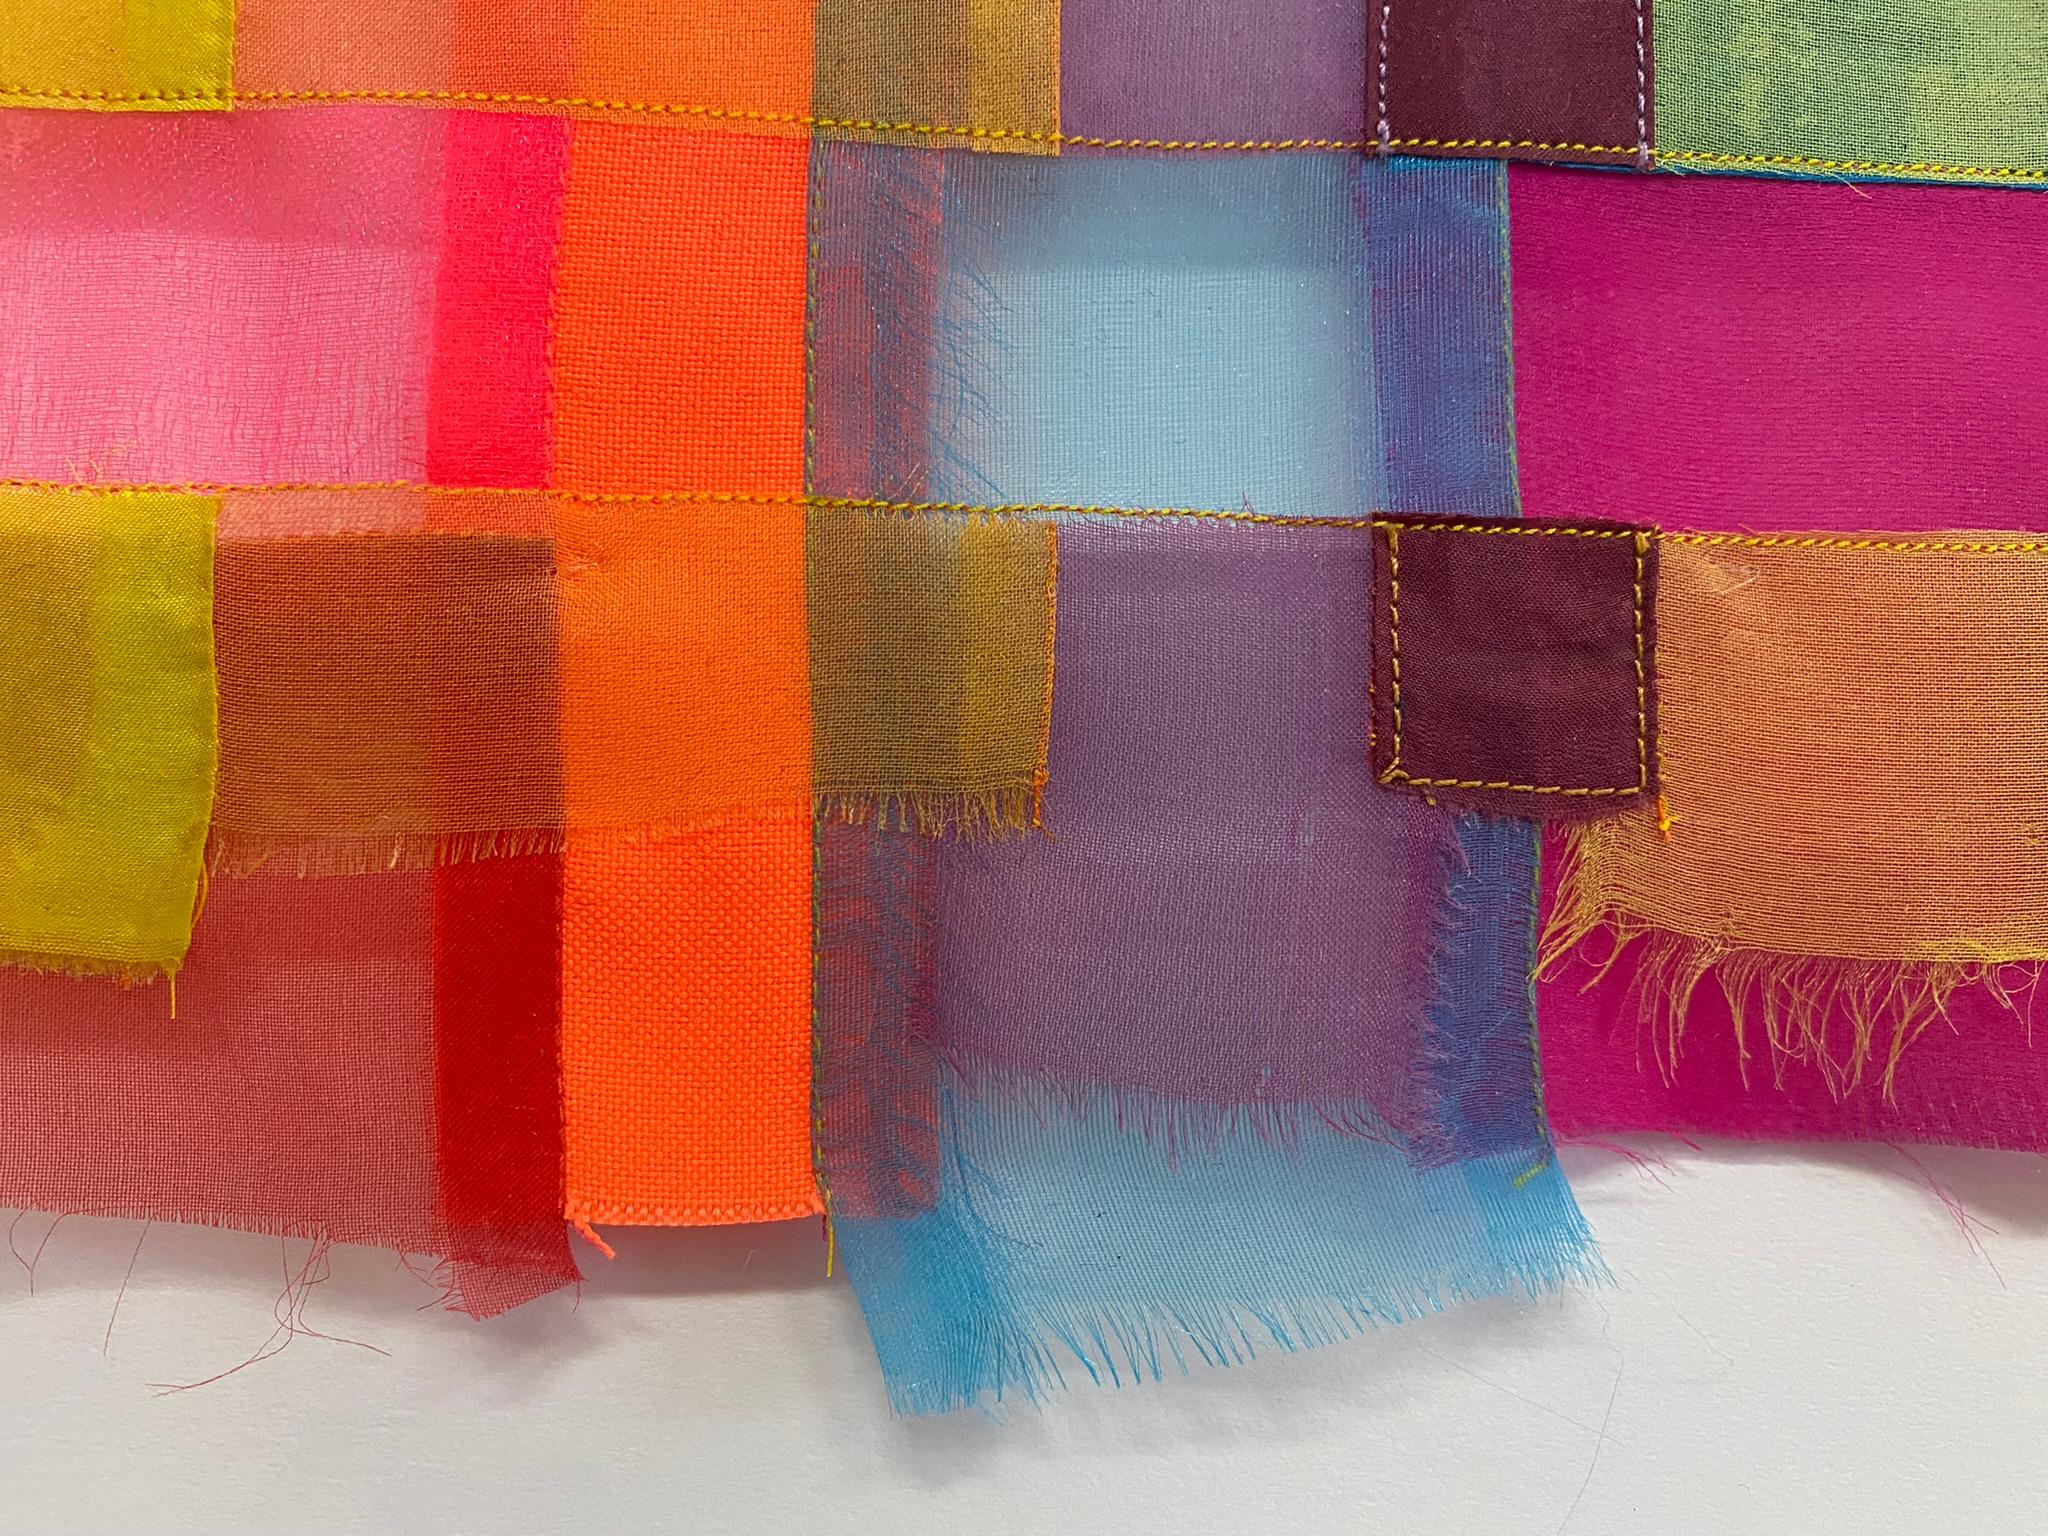 Untitled (0382), colorful abstract fabric sculpture - Beige Abstract Sculpture by Linda Schmidt